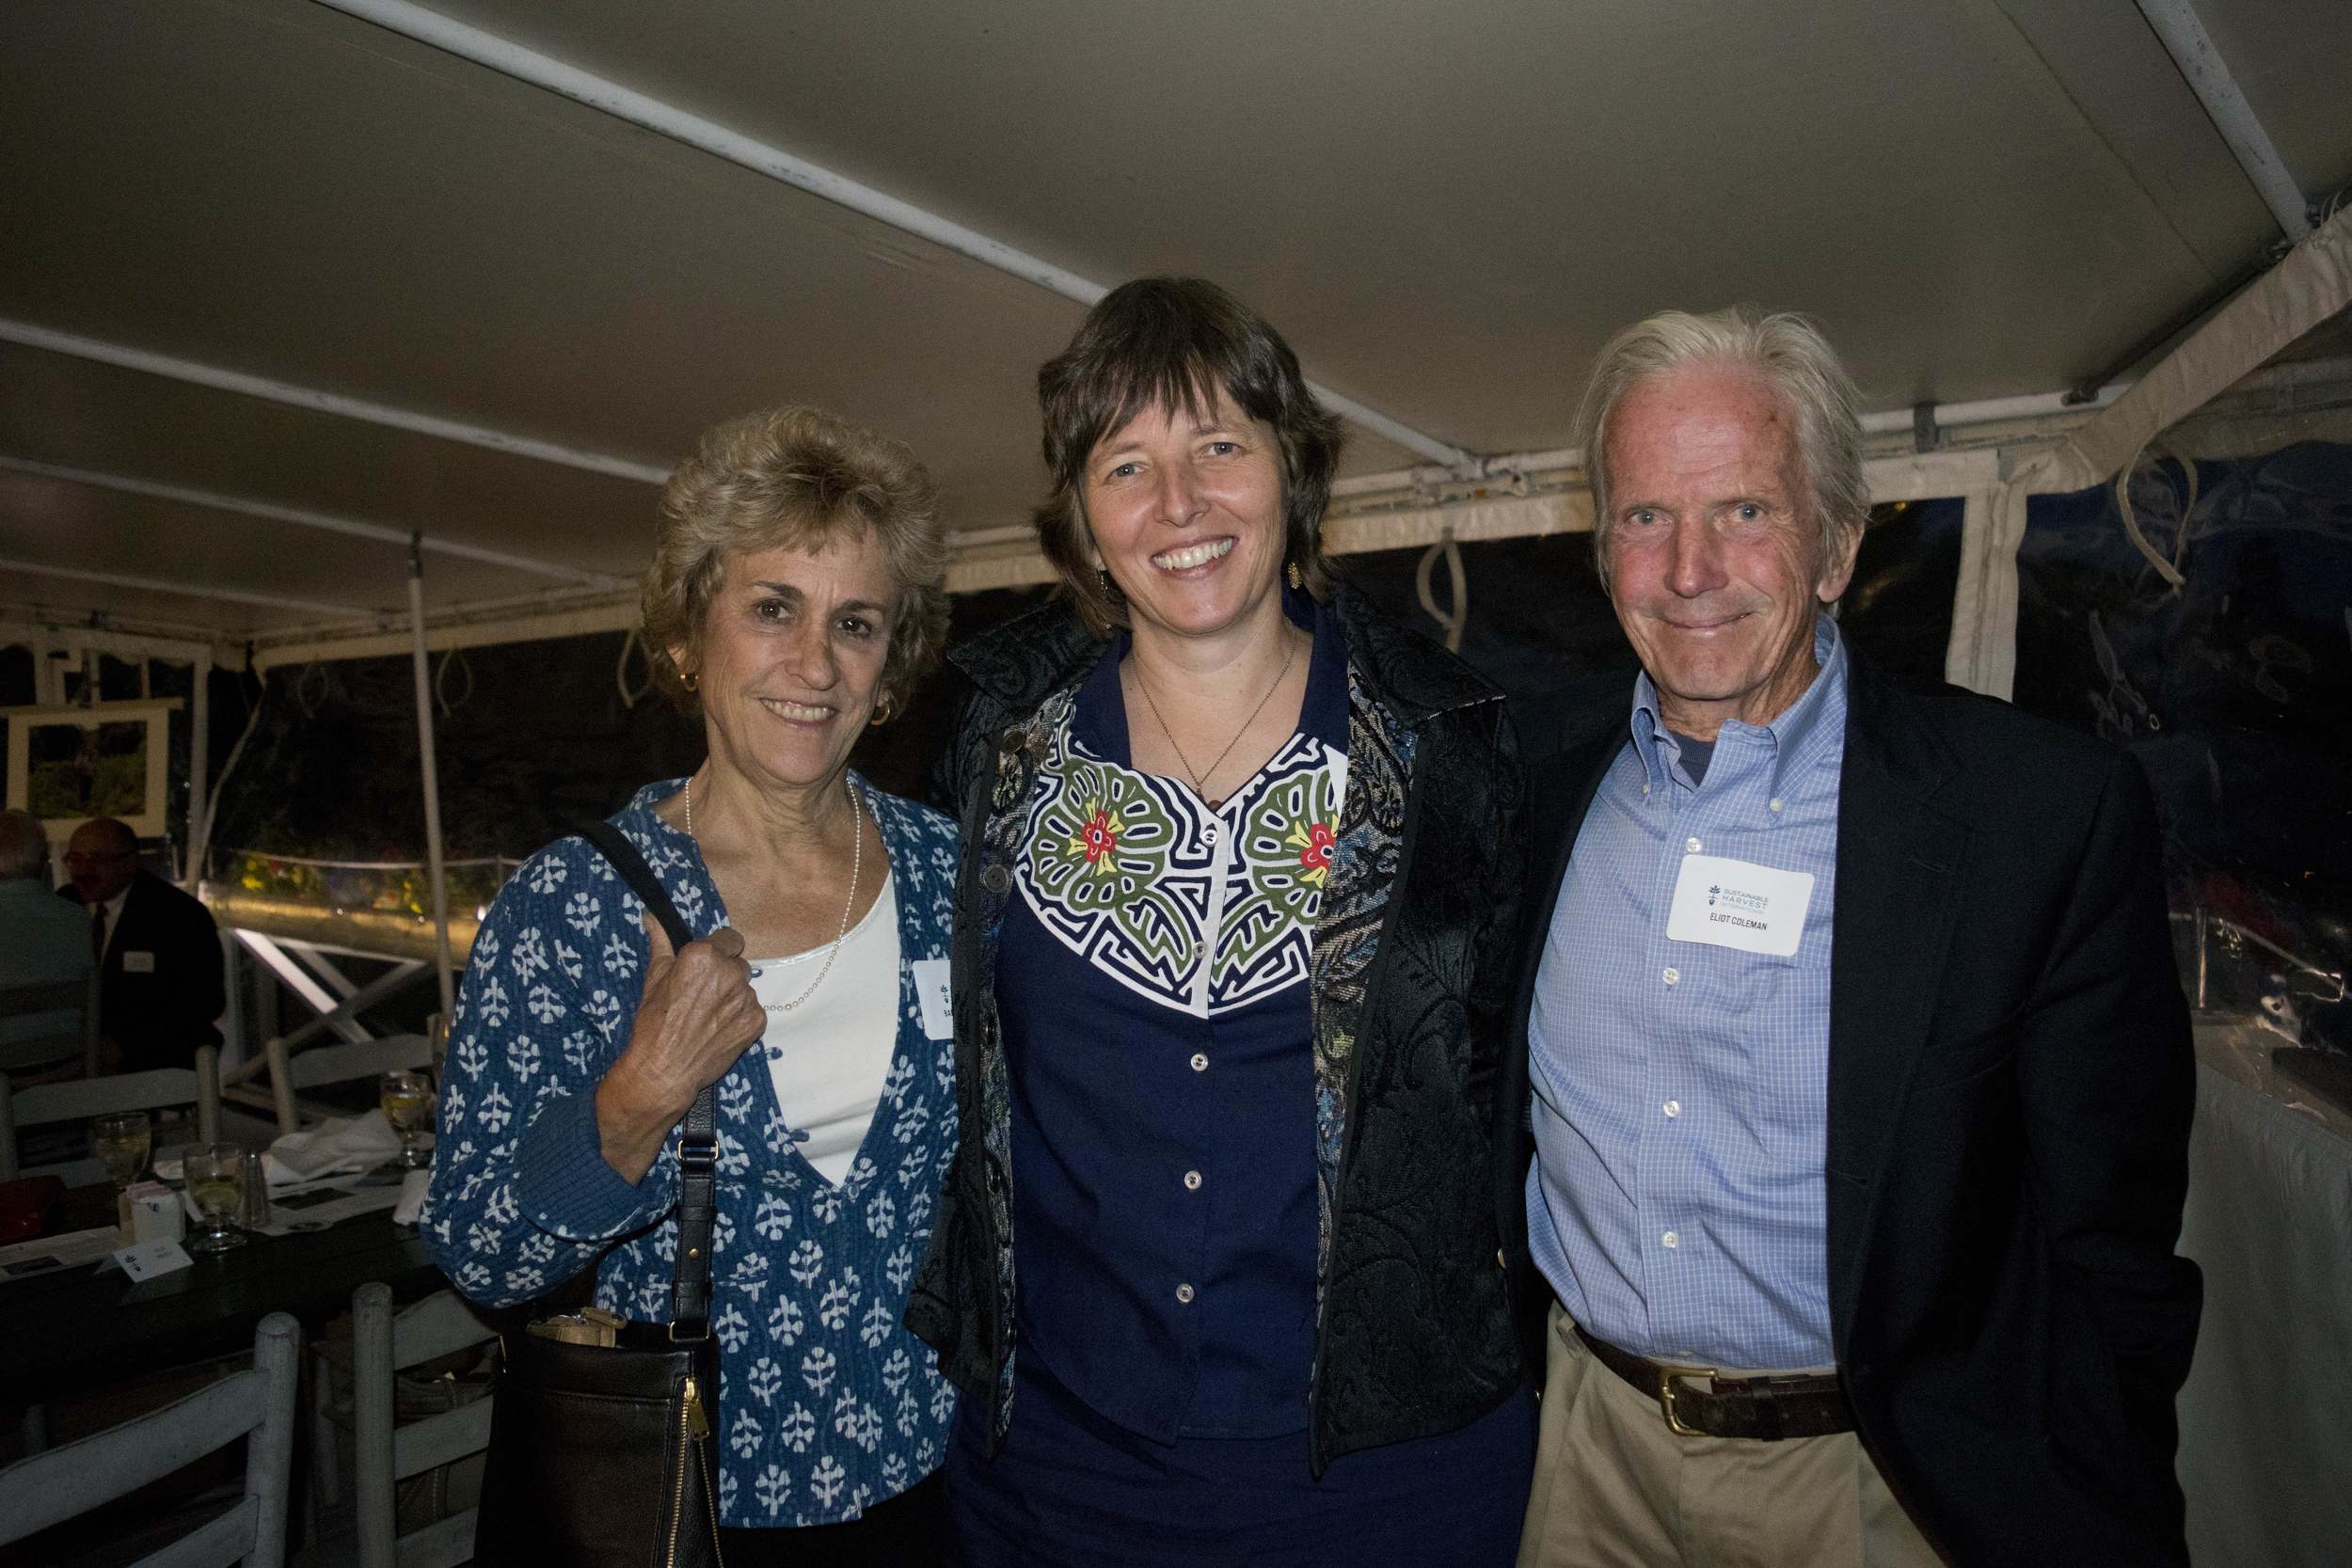 Dinner guests Barbara Damrosch (left) and Eliot Coleman (right) of Four Season Farm with Sustainable Harvest International Founder and President Florence Reed (center)